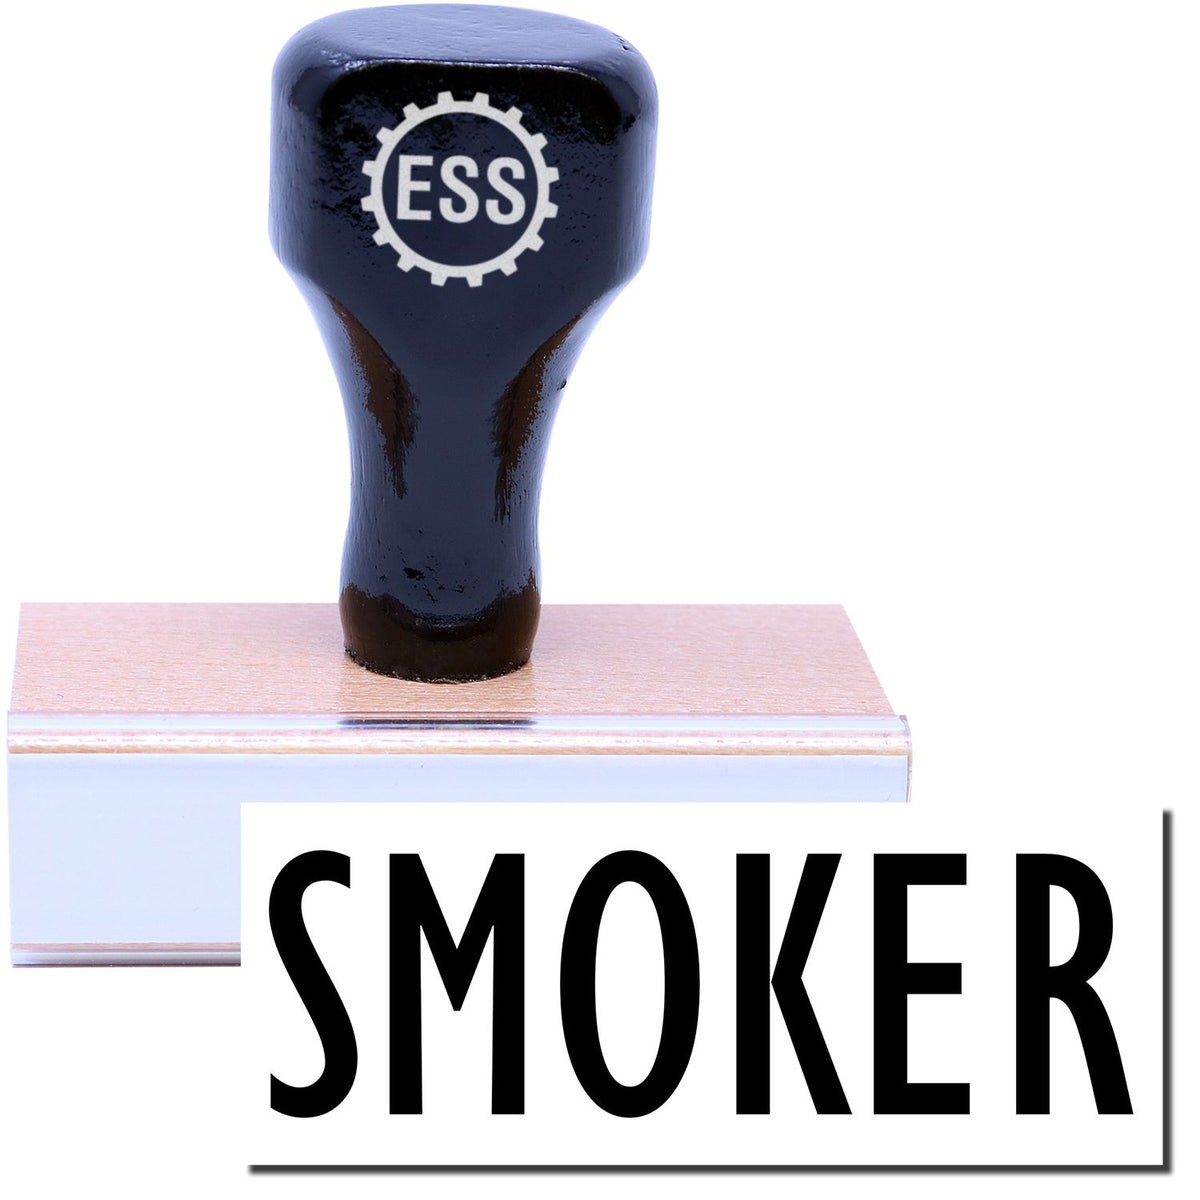 A stock office rubber stamp with a stamped image showing how the text &quot;SMOKER&quot; in a large font is displayed after stamping.